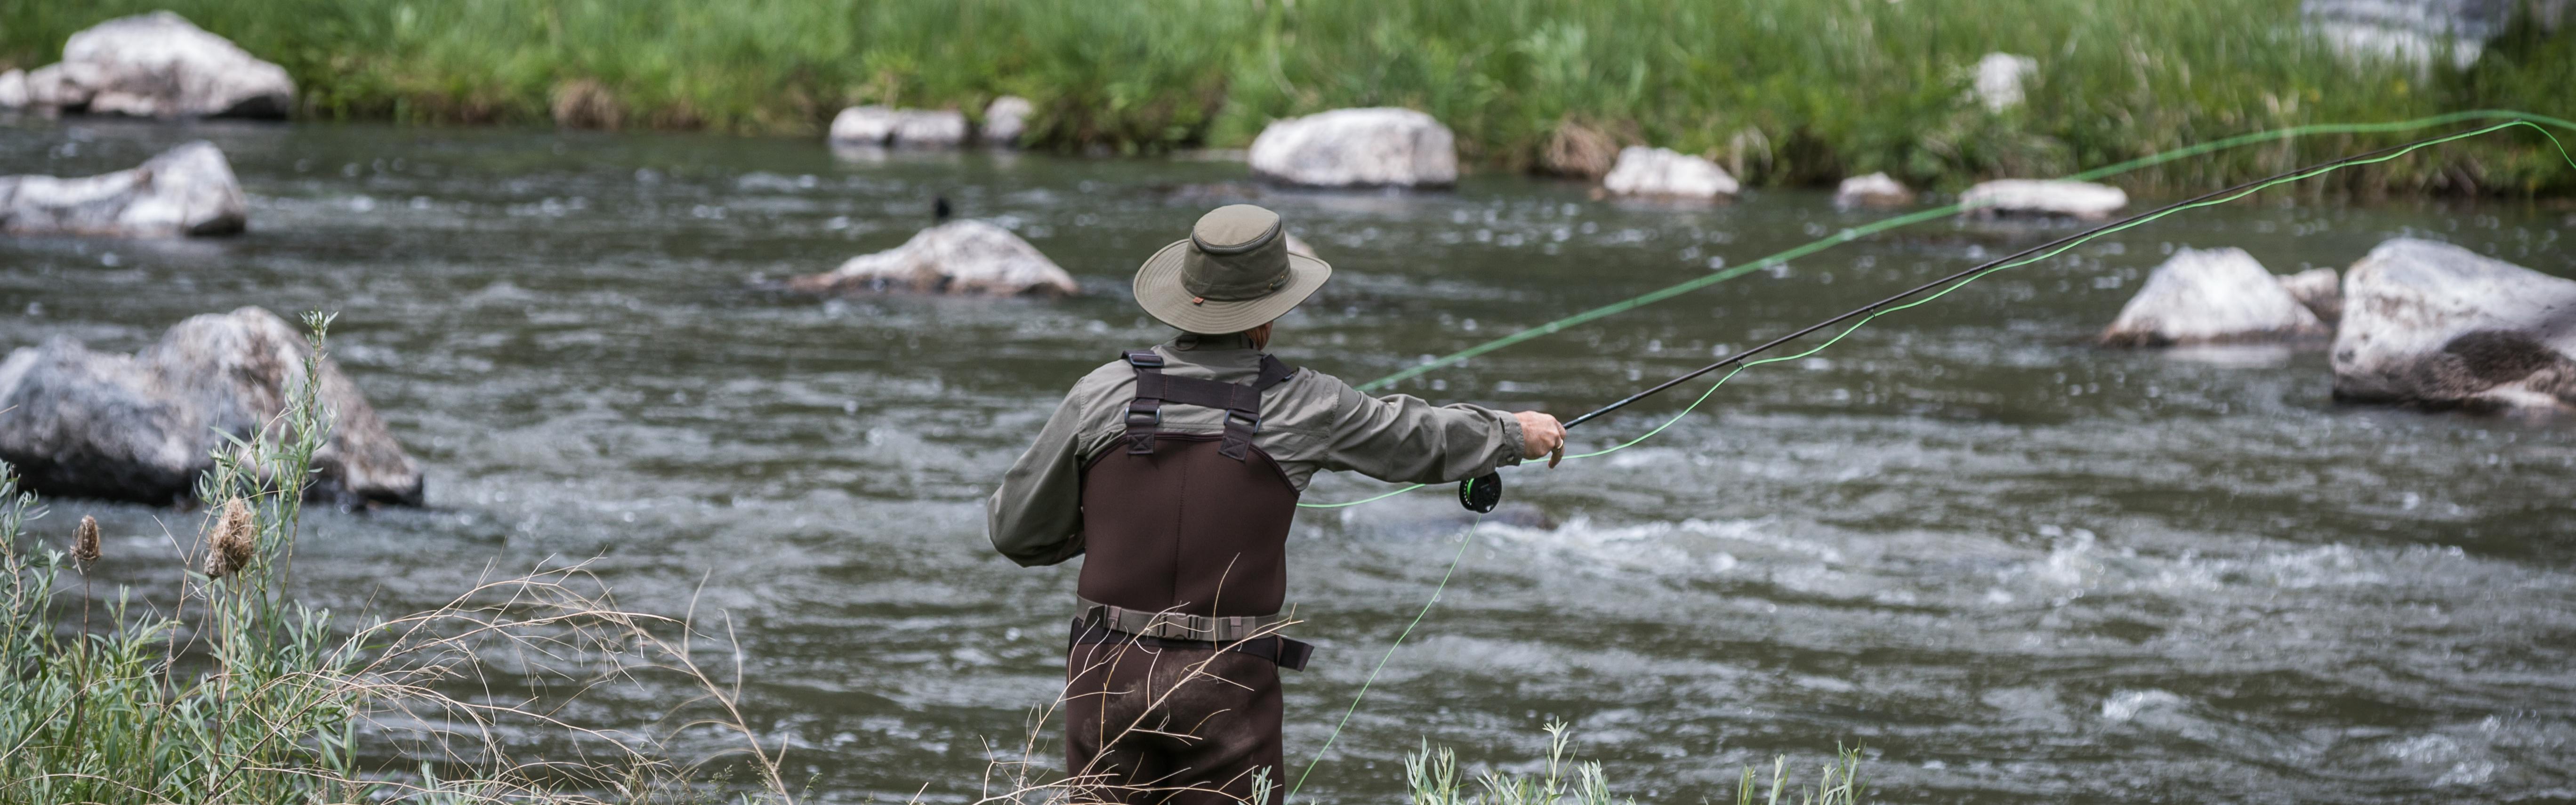 Expert Review: Orvis Helios 3F Fly Rod